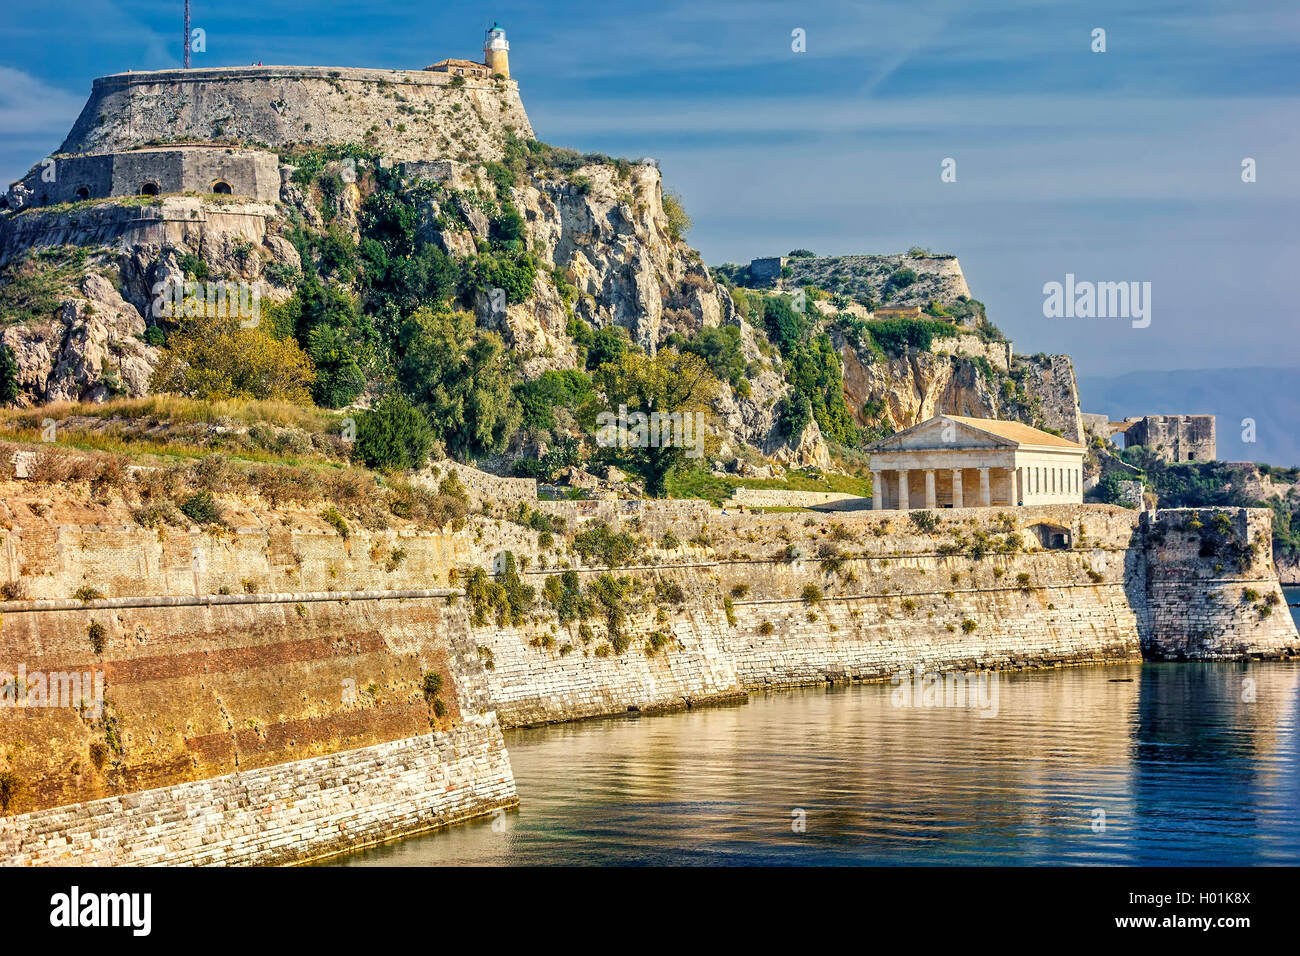 The Church and Lighthouse At The Old Fortress Corfu Greece Stock Photo